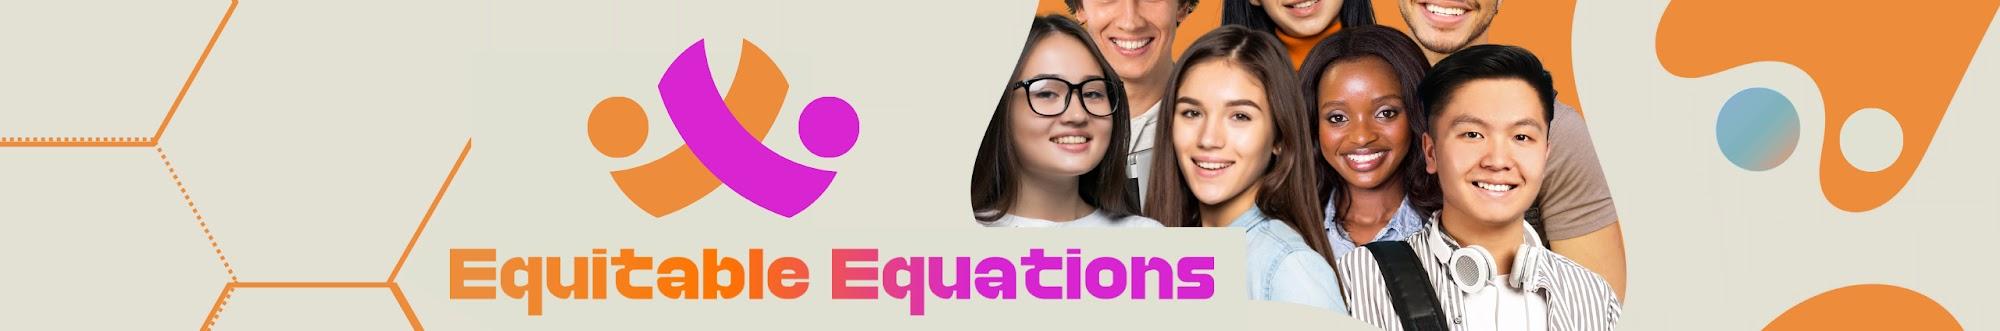 Equitable Equations